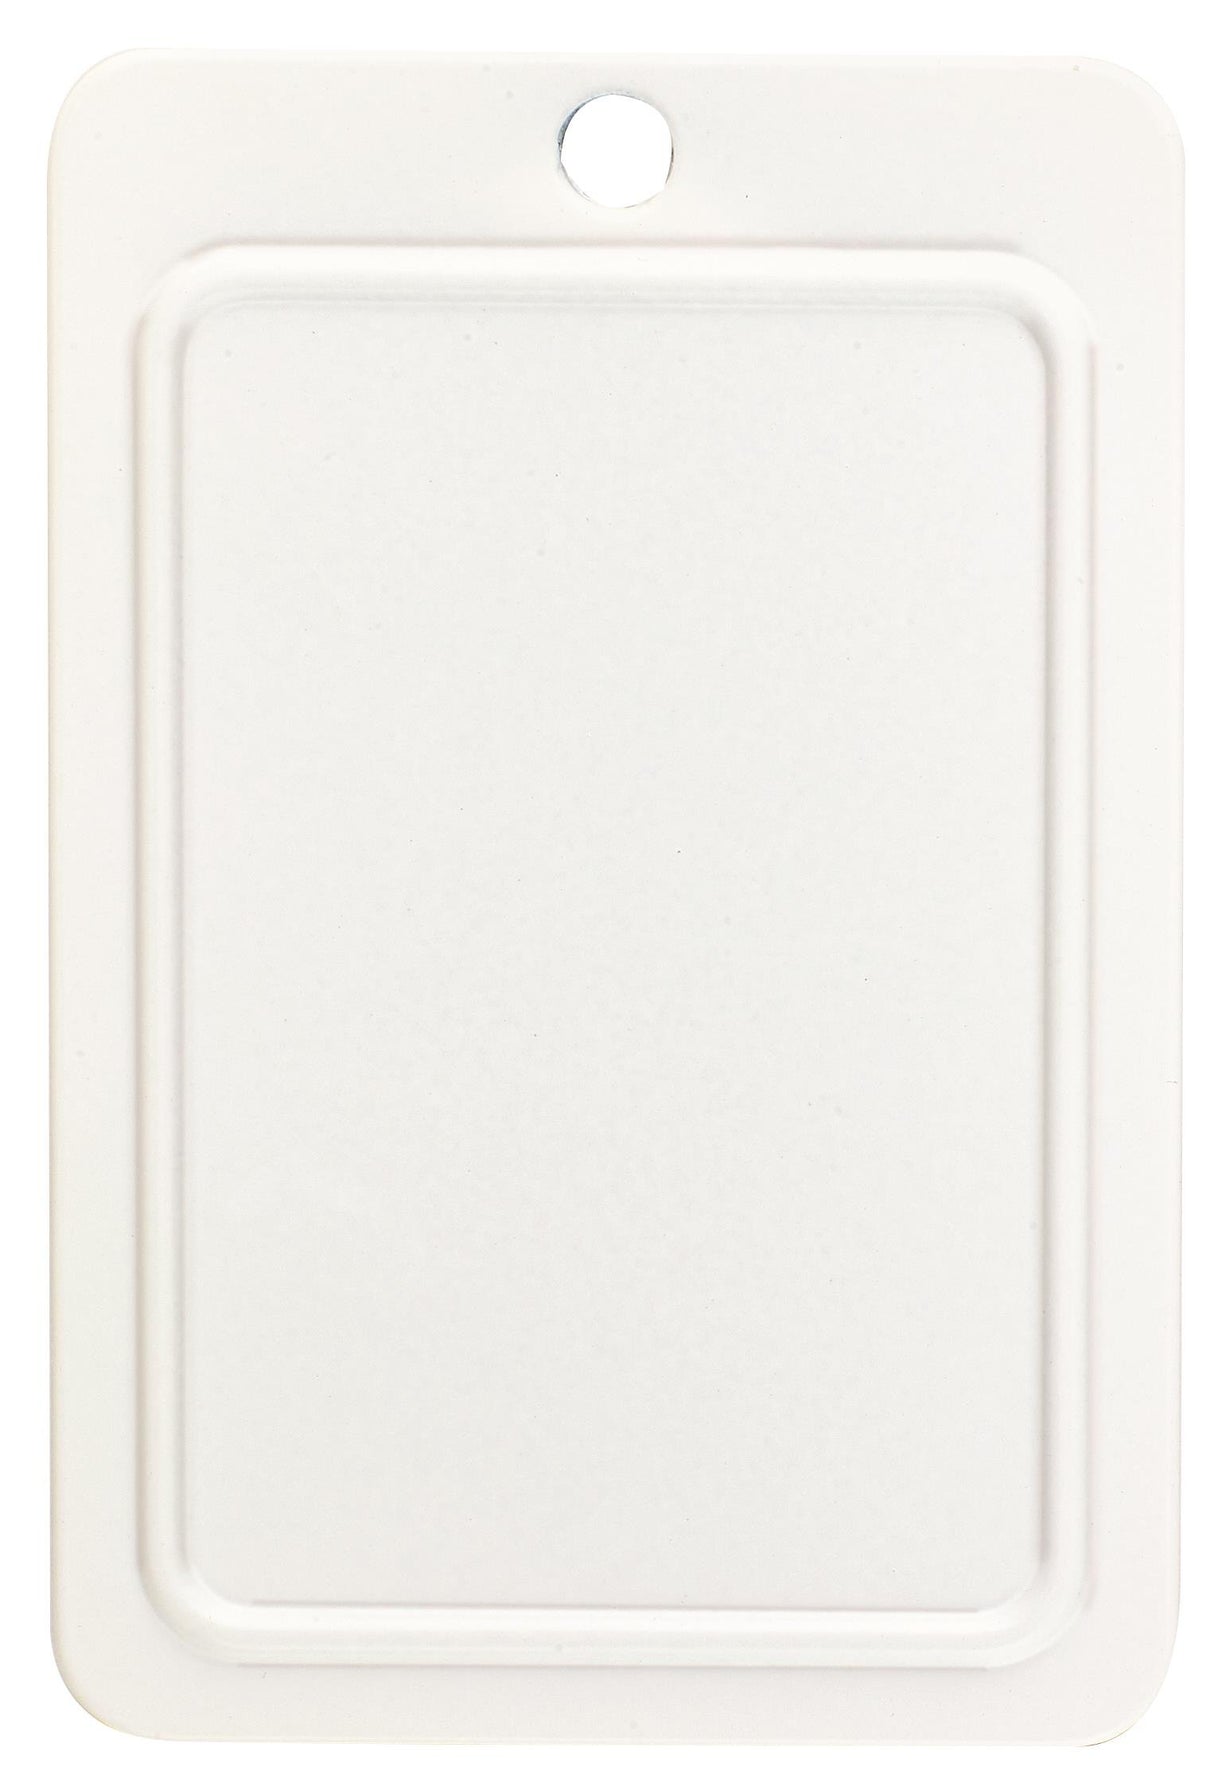 Amerock BPR7128W Self-Closing, Face Mount Hinge with 3/8in(10mm) Inset - White - 2 Pack